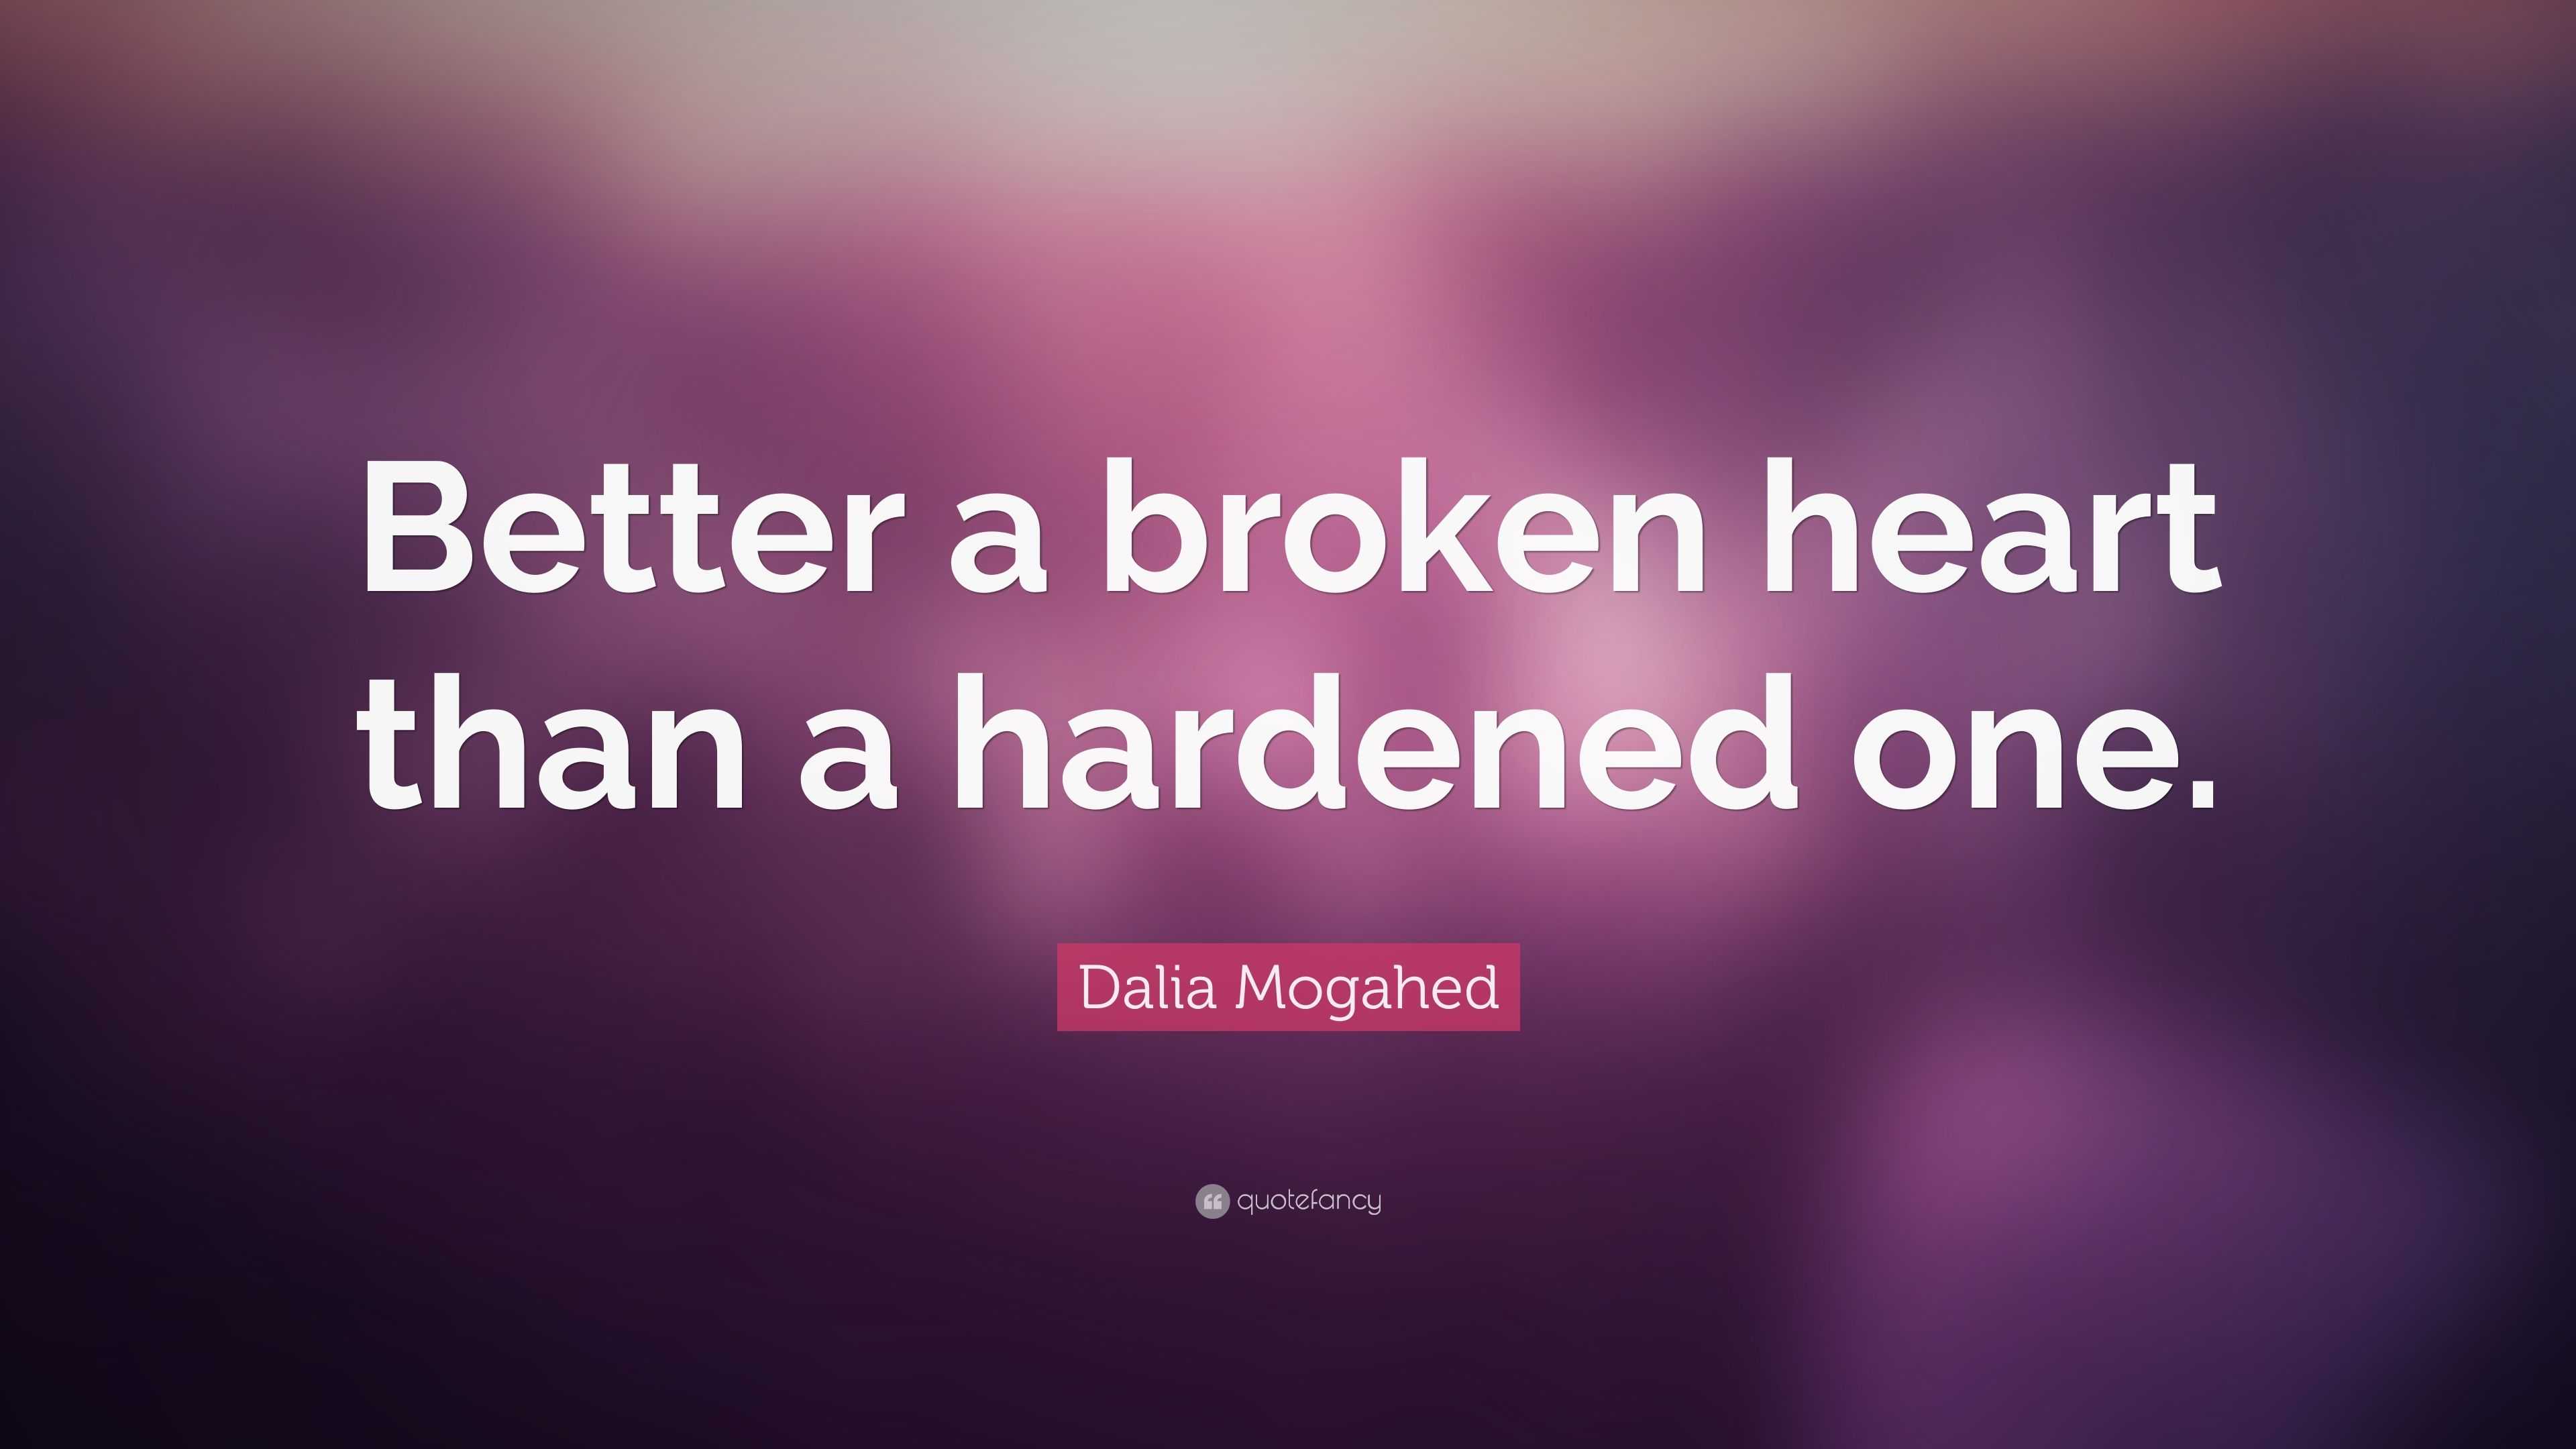 Dalia Mogahed Quote: “Better a broken heart than a hardened one.”